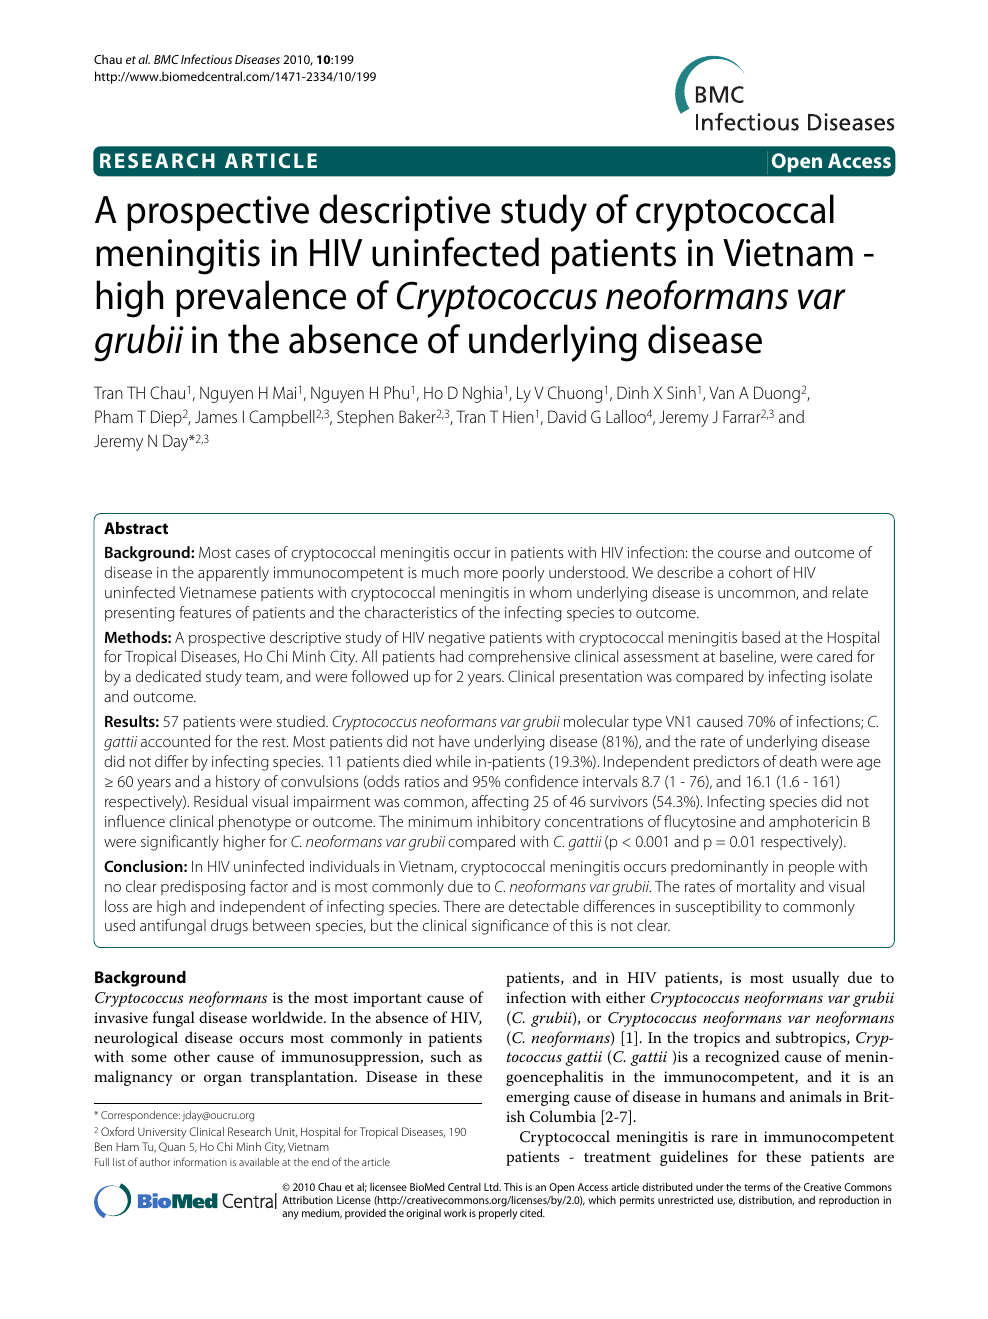 A Prospective Descriptive Study Of Cryptococcal Meningitis In Hiv Uninfected Patients In Vietnam High Prevalence Of Cryptococcus Neoformans Var Grubii In The Absence Of Underlying Disease Topic Of Research Paper